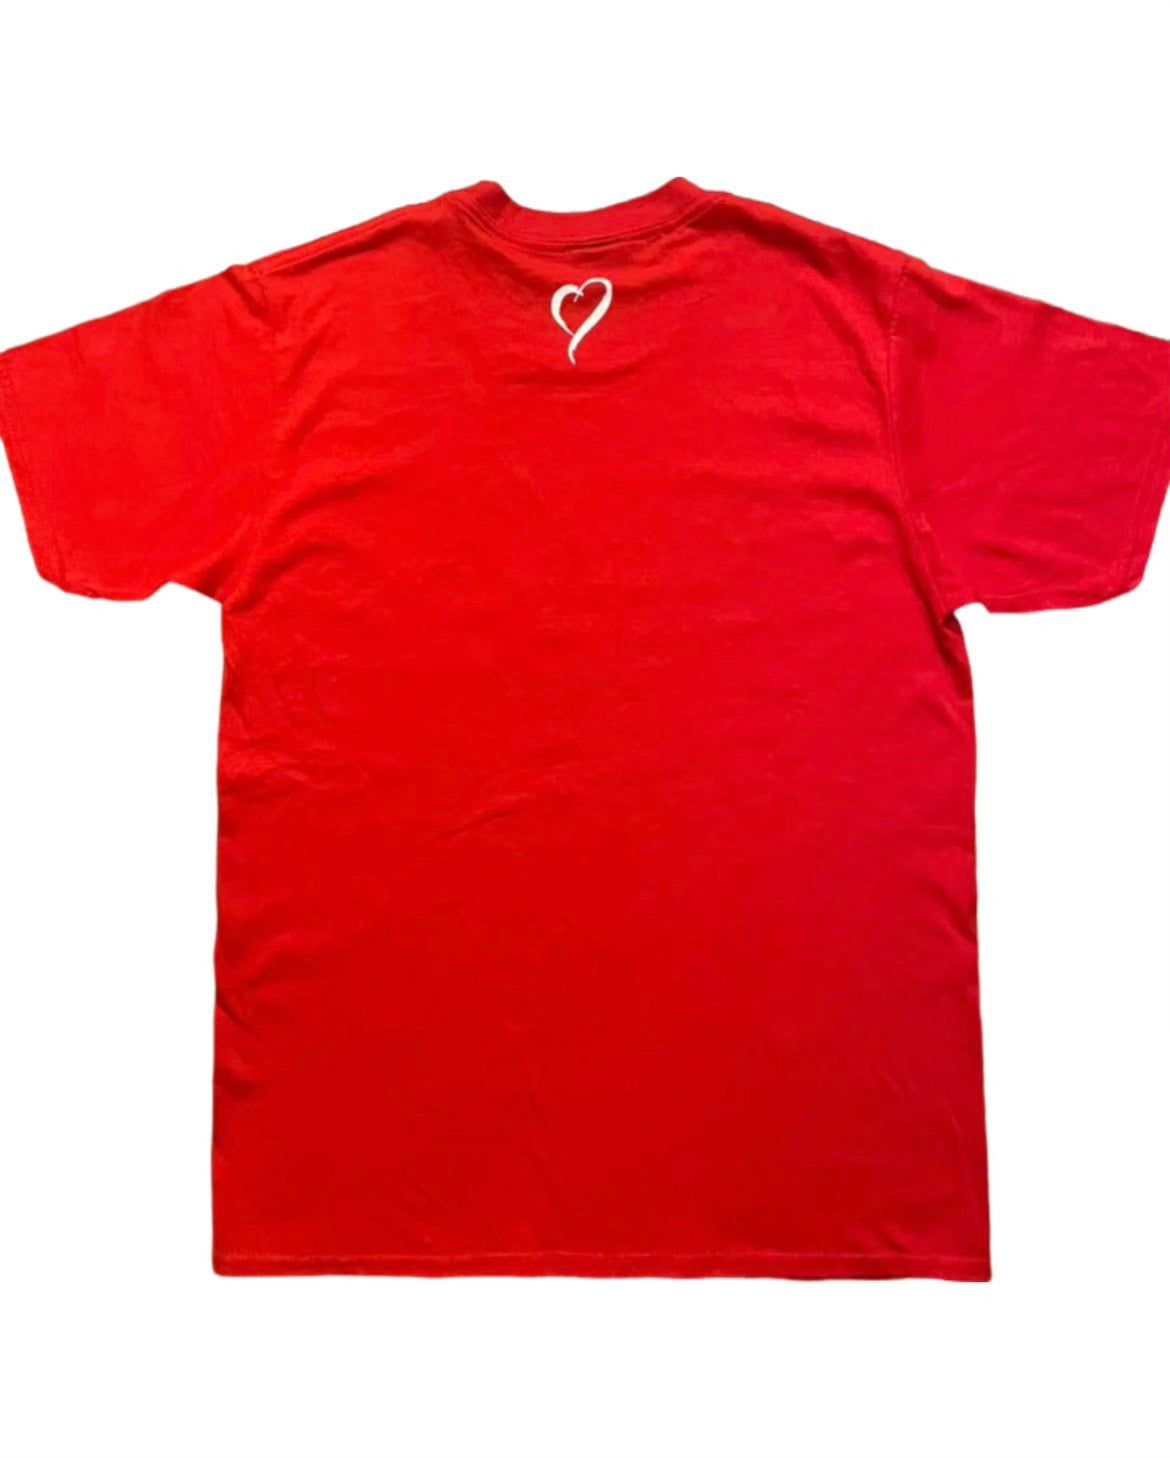 T-Shirt - Red with White Logo